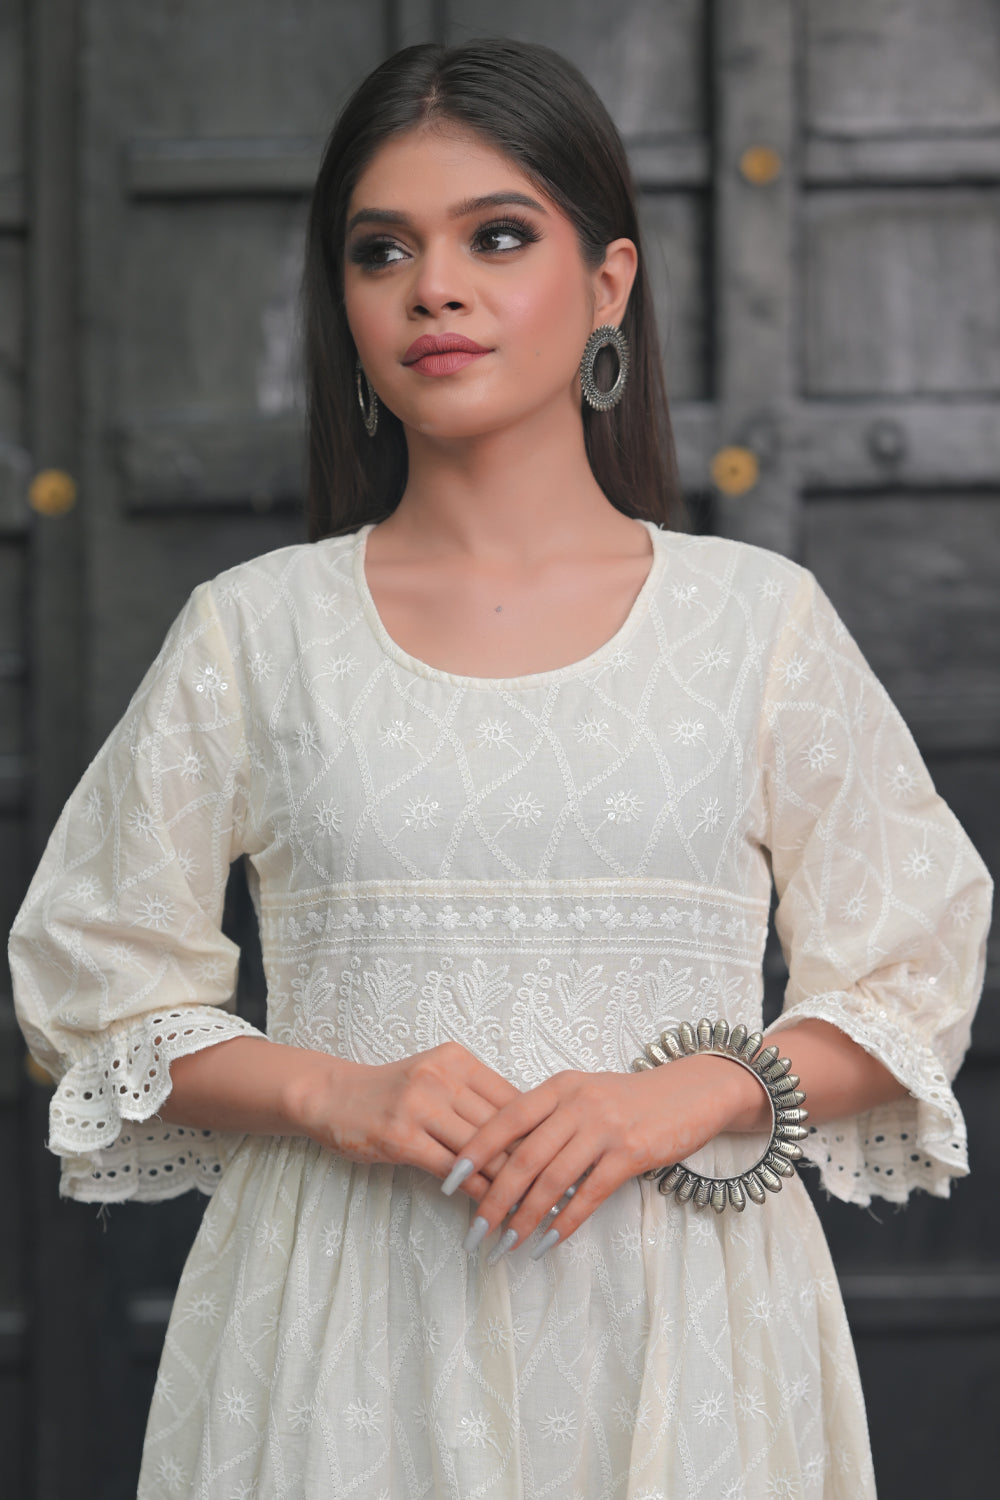 Sea Shell Chikankari Style Dress with Puff Sleeves and Eyelet Border | Made To Order